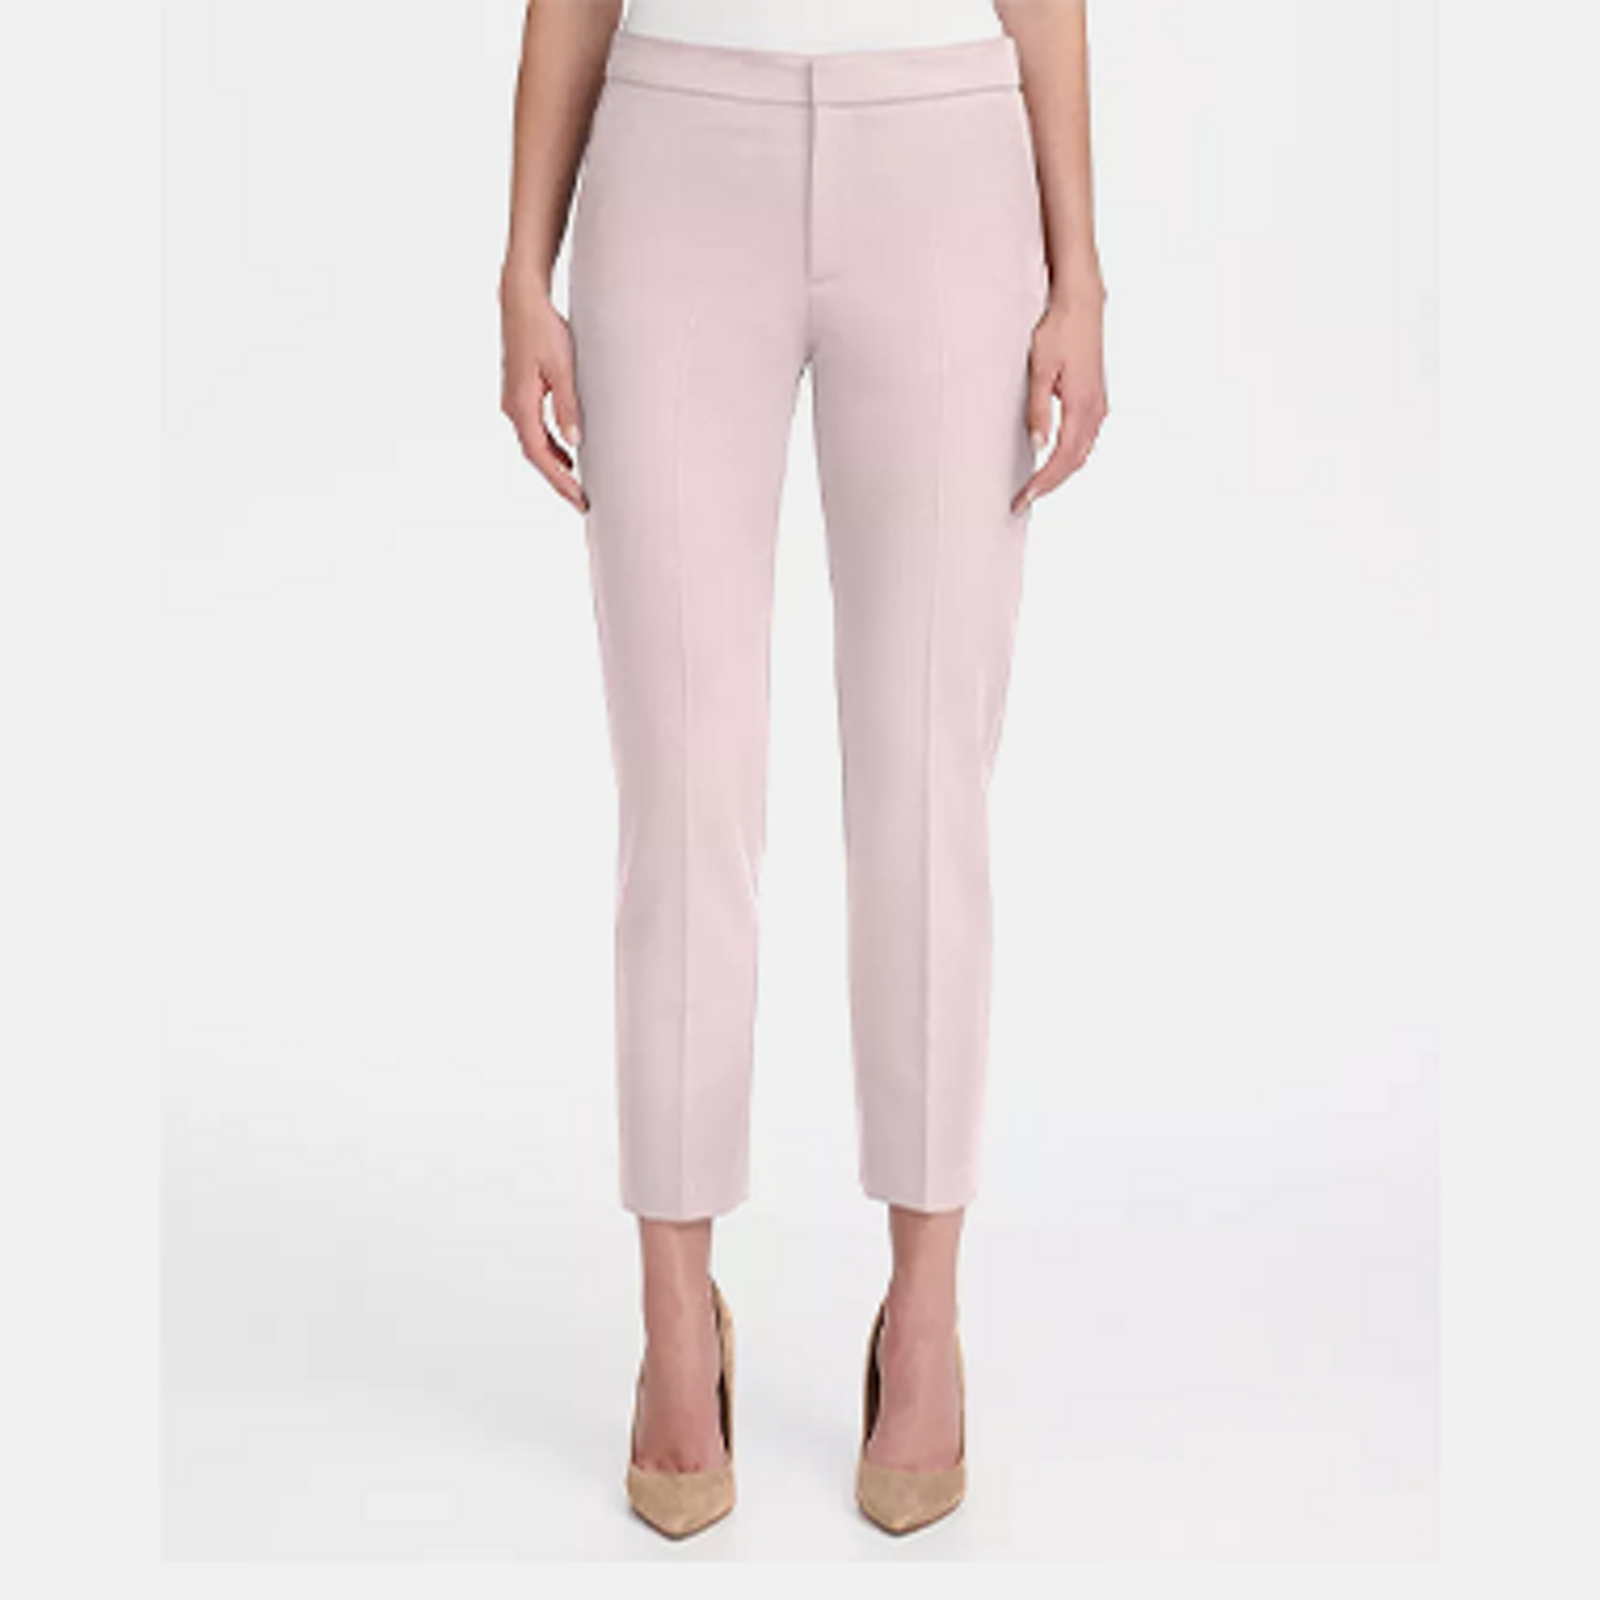 SPANX Pants Business Attire for Women - Macy's